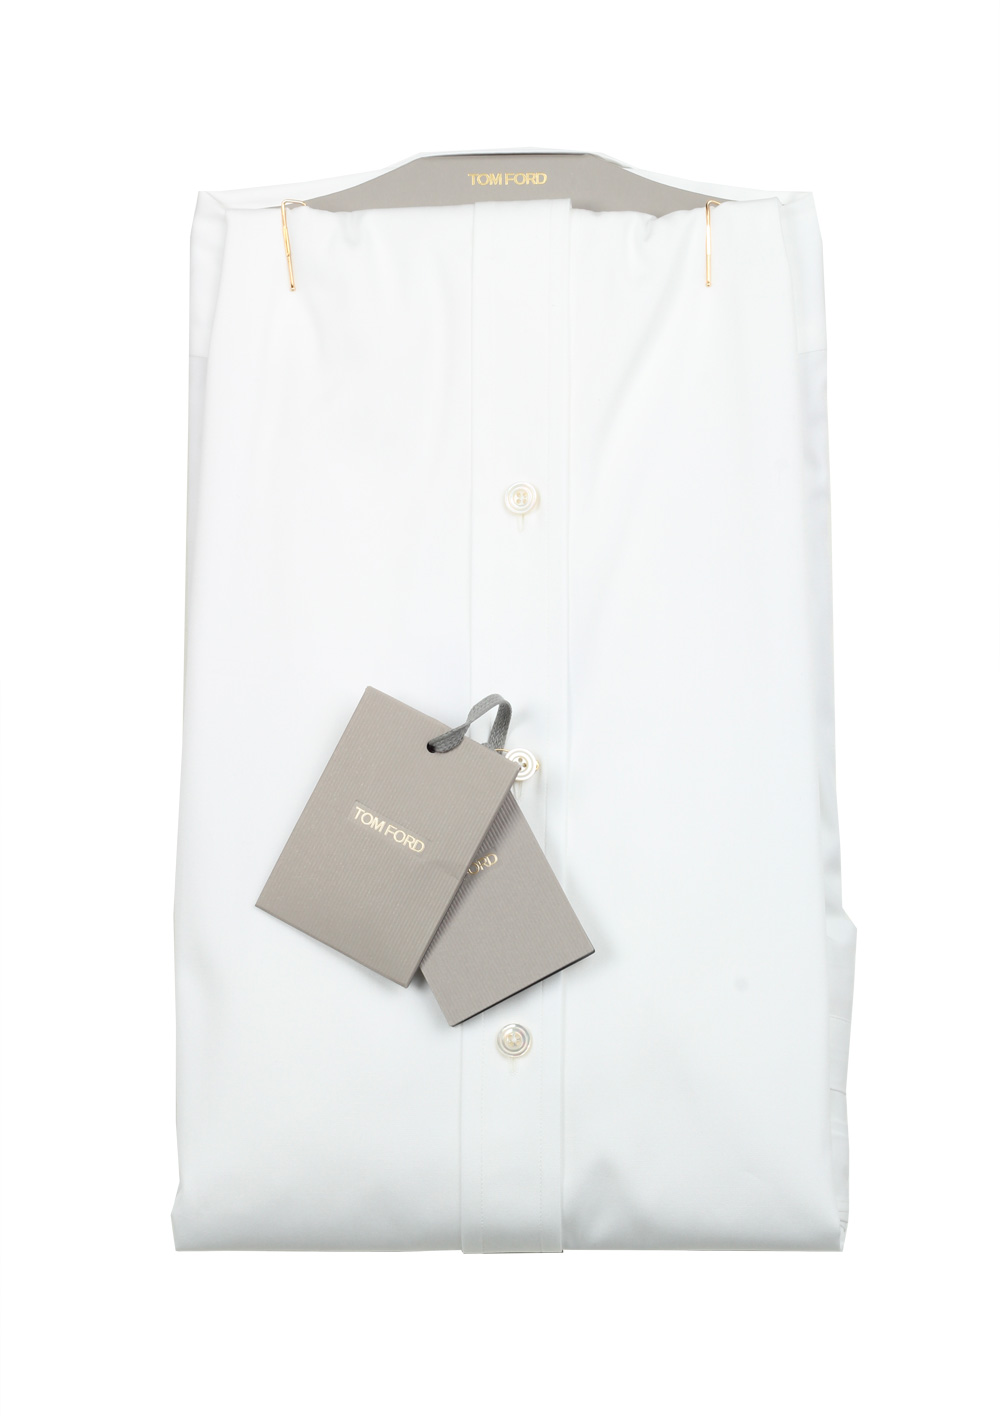 TOM FORD White Signature Dress Shirt French Cuffs | Costume Limité